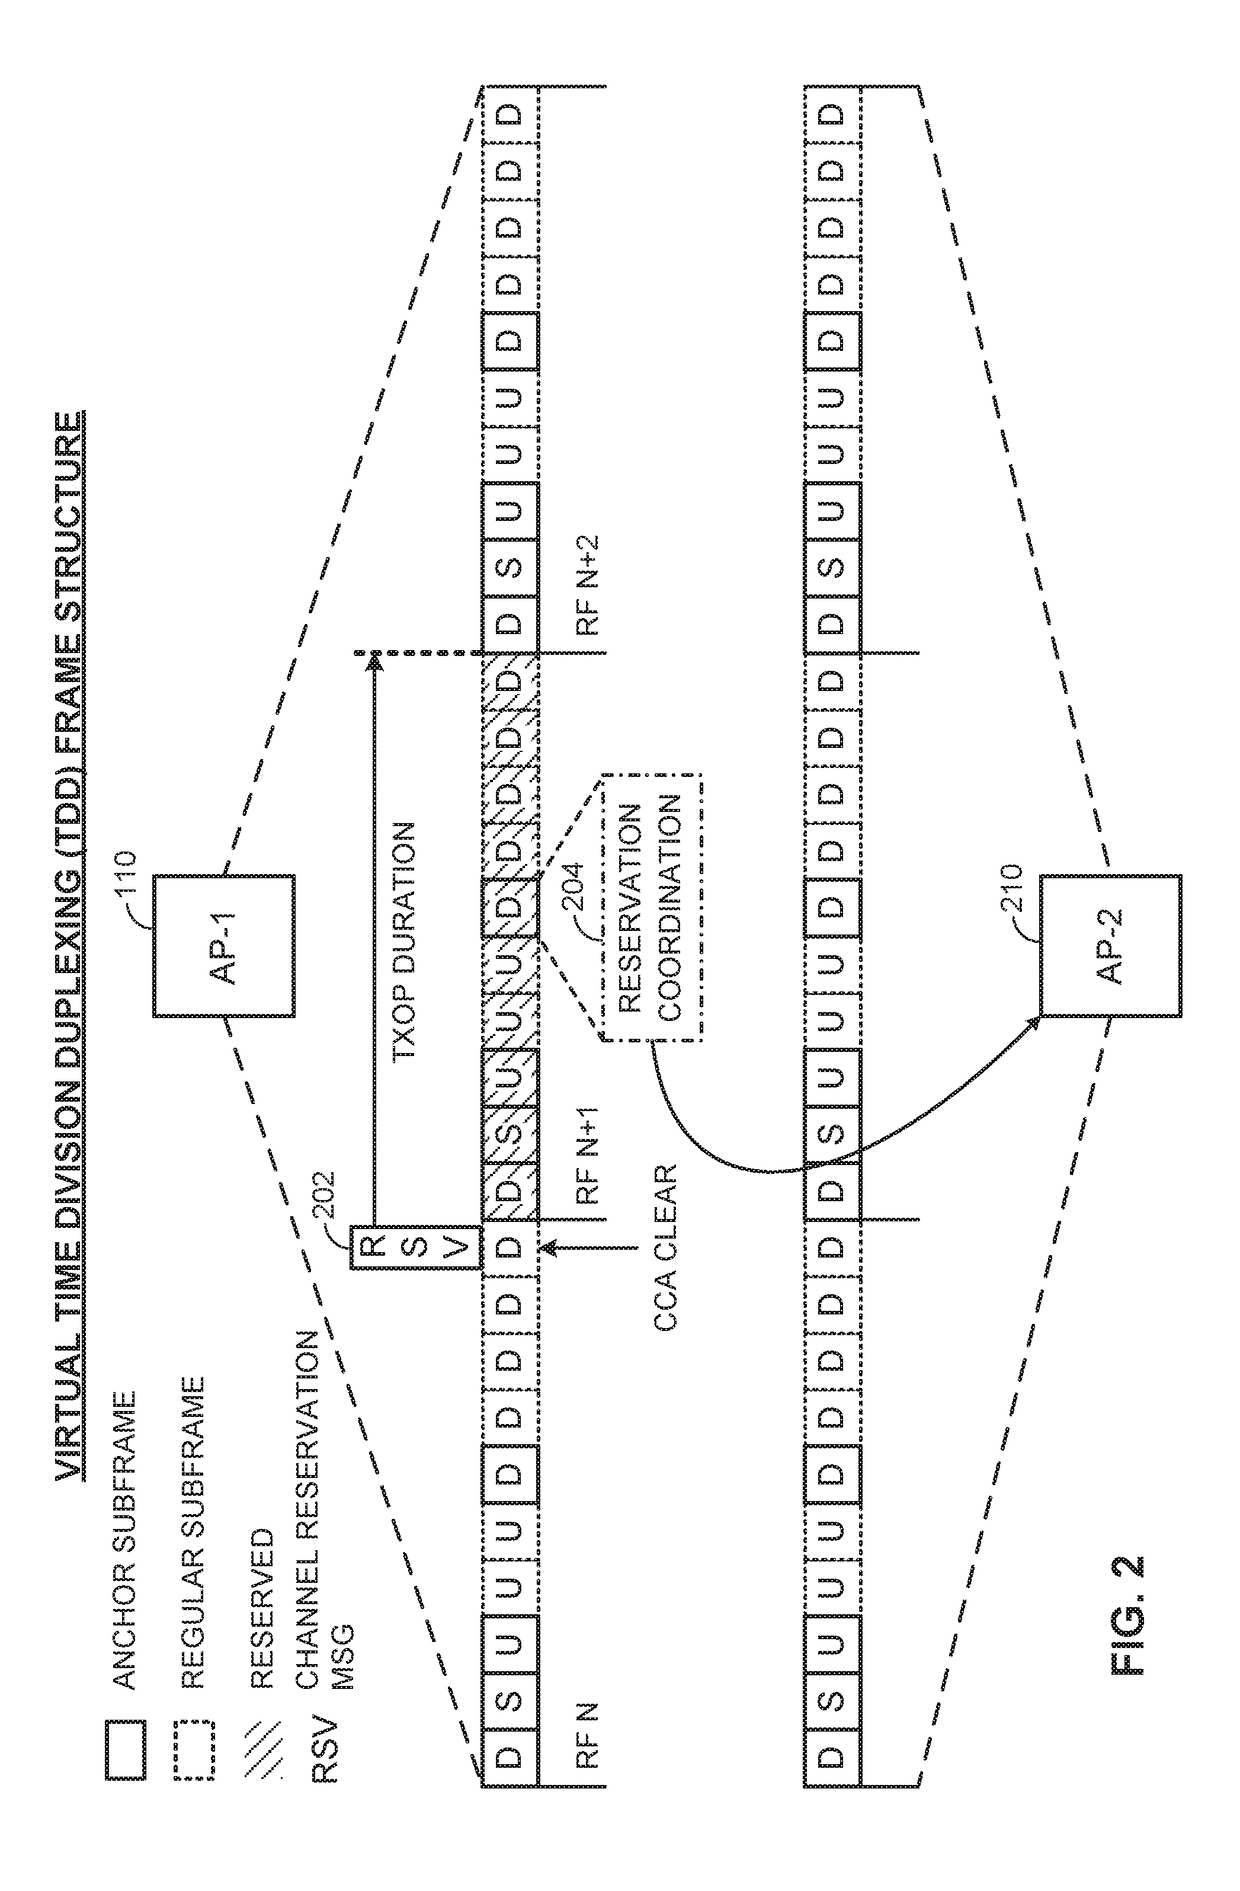 Enhanced channel reservation for co-existence on a shared communication medium